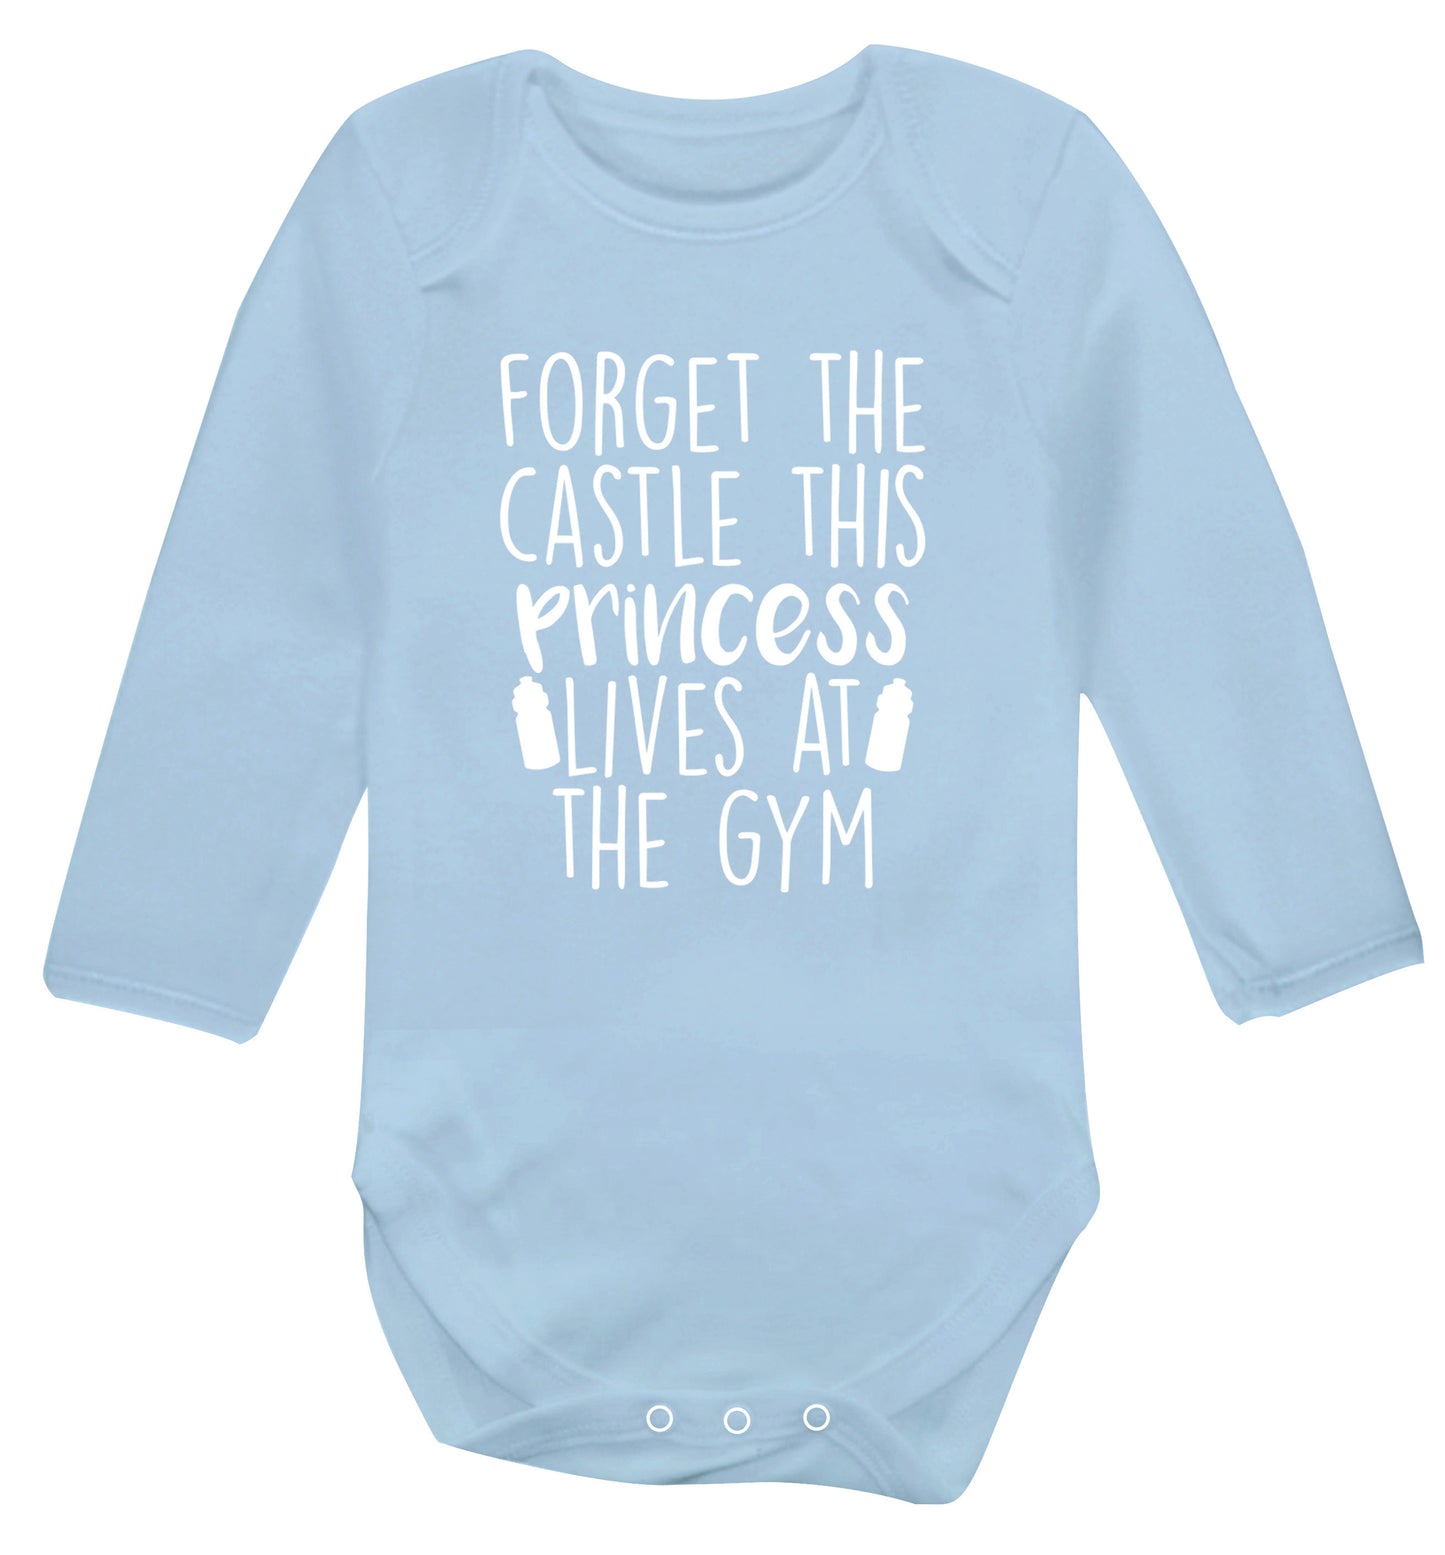 Forget the castle this princess lives at the gym Baby Vest long sleeved pale blue 6-12 months